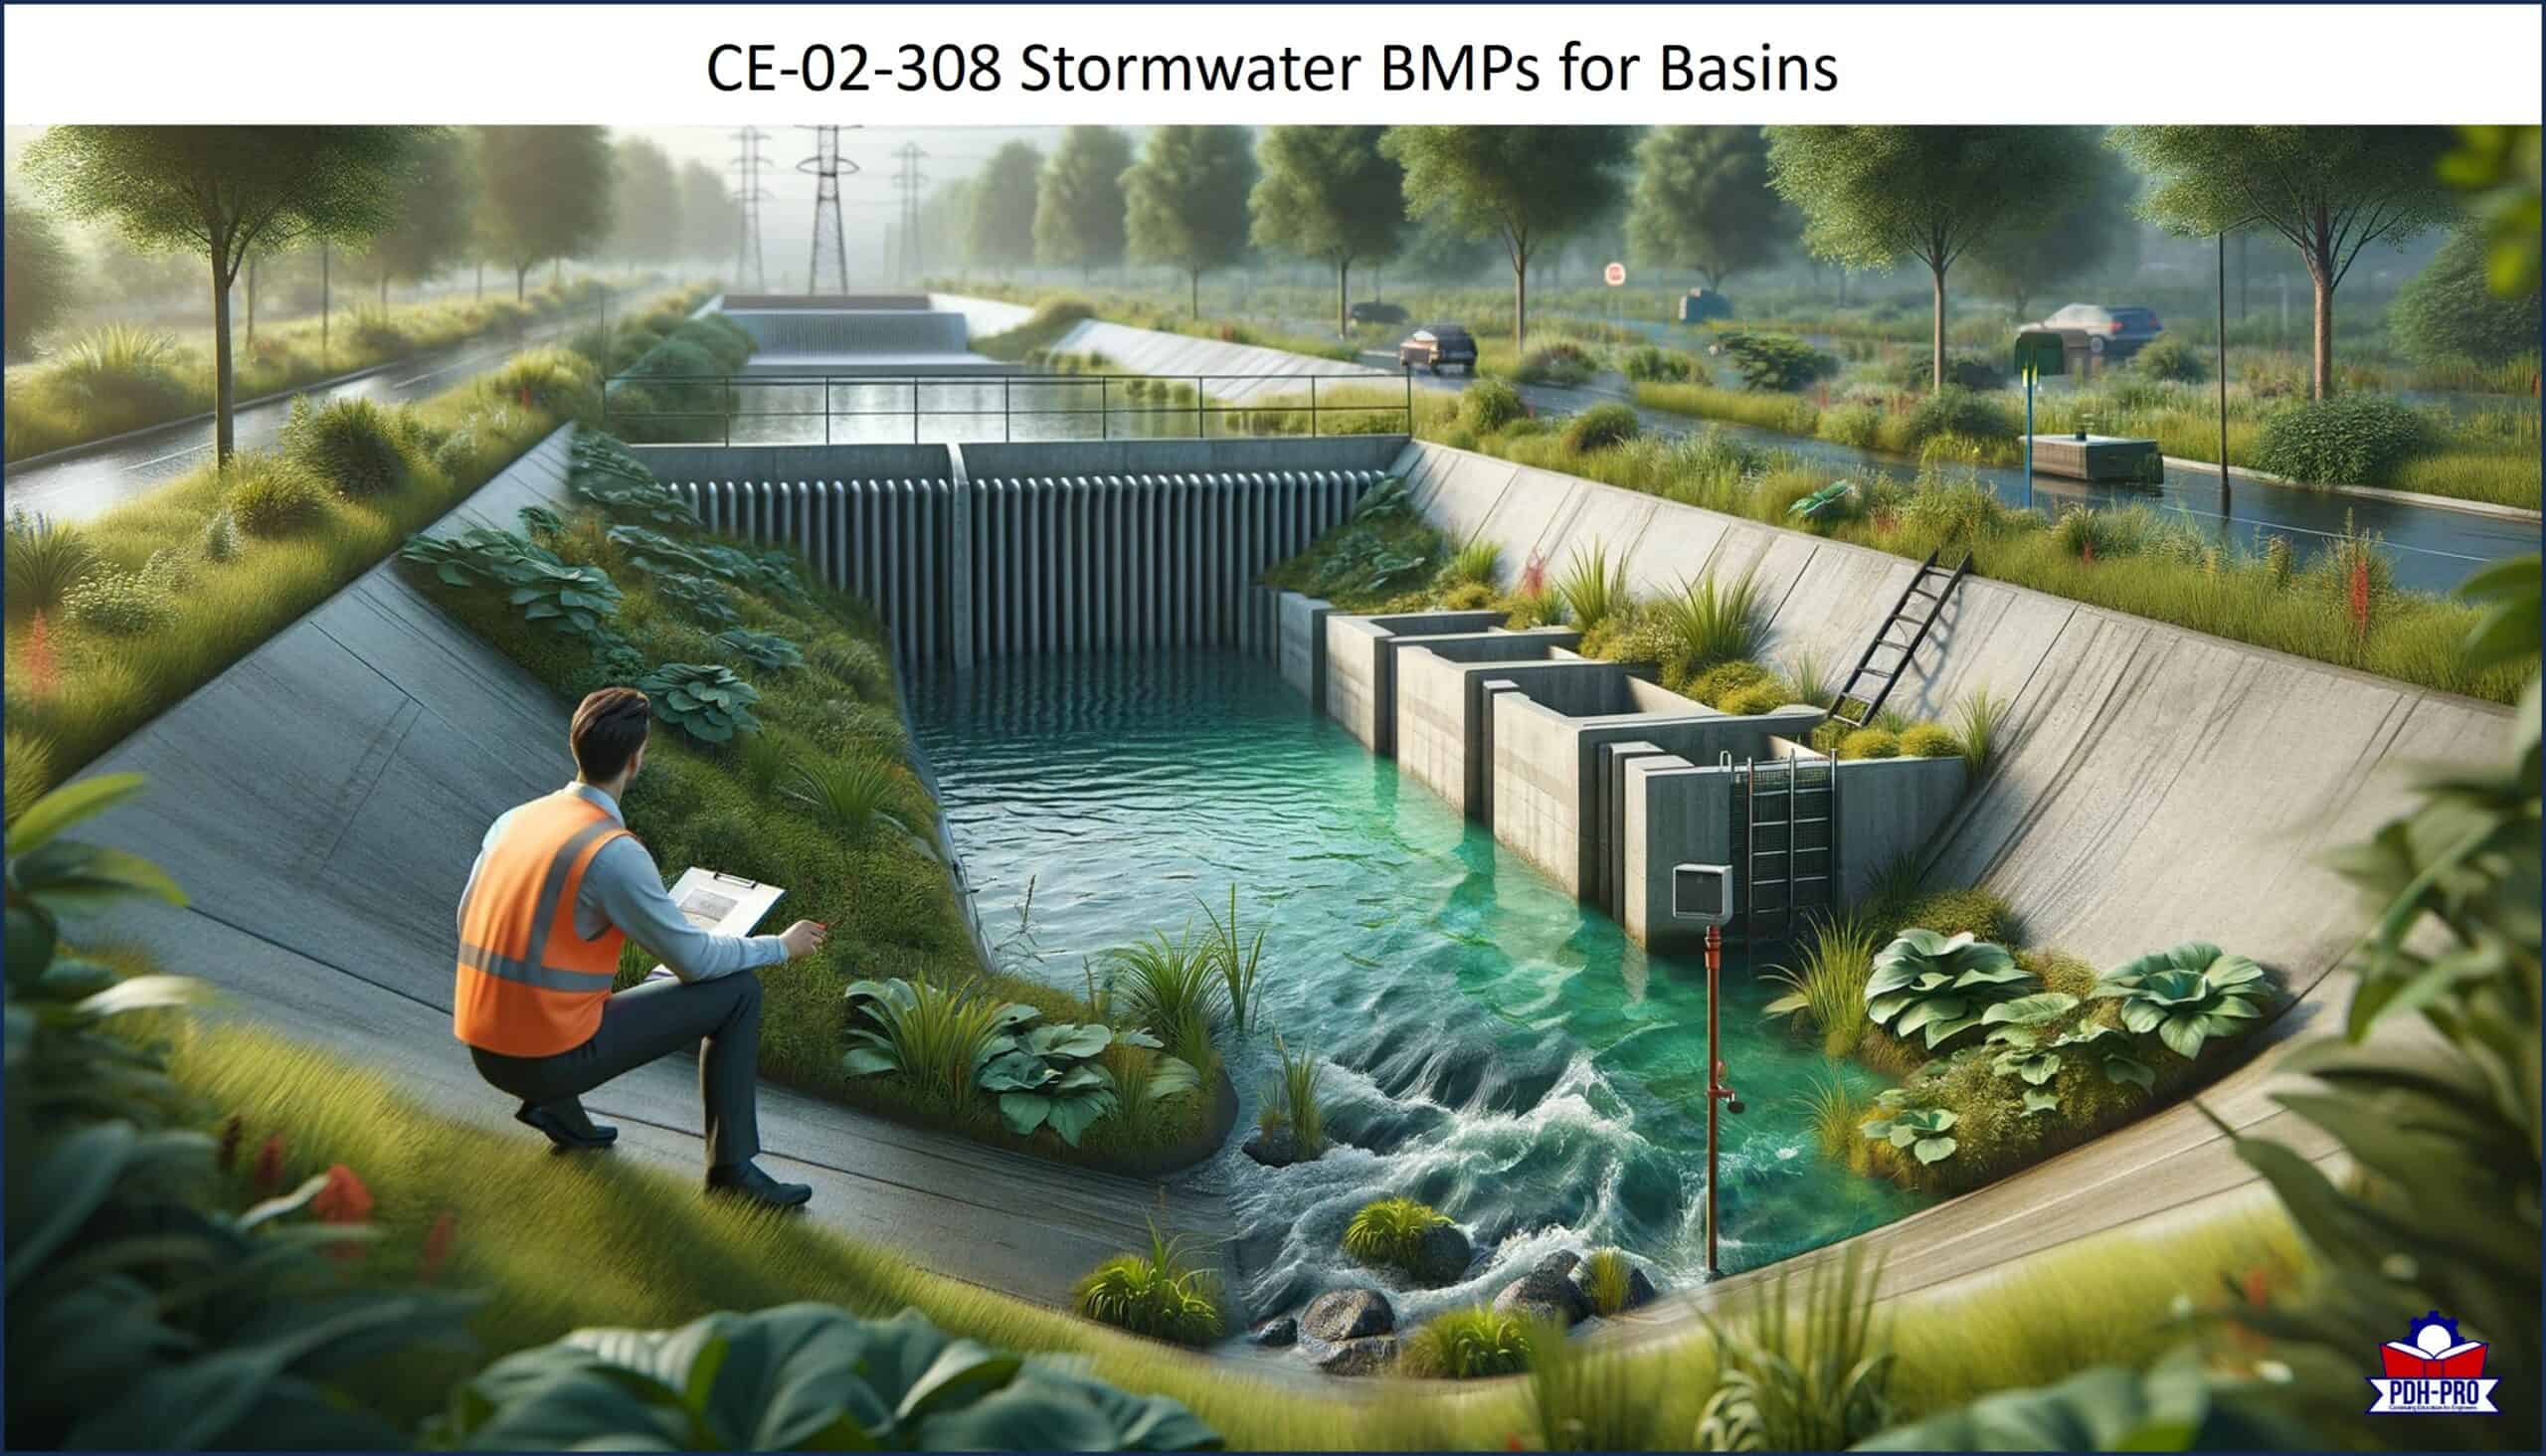 Stormwater BMPs for Basins